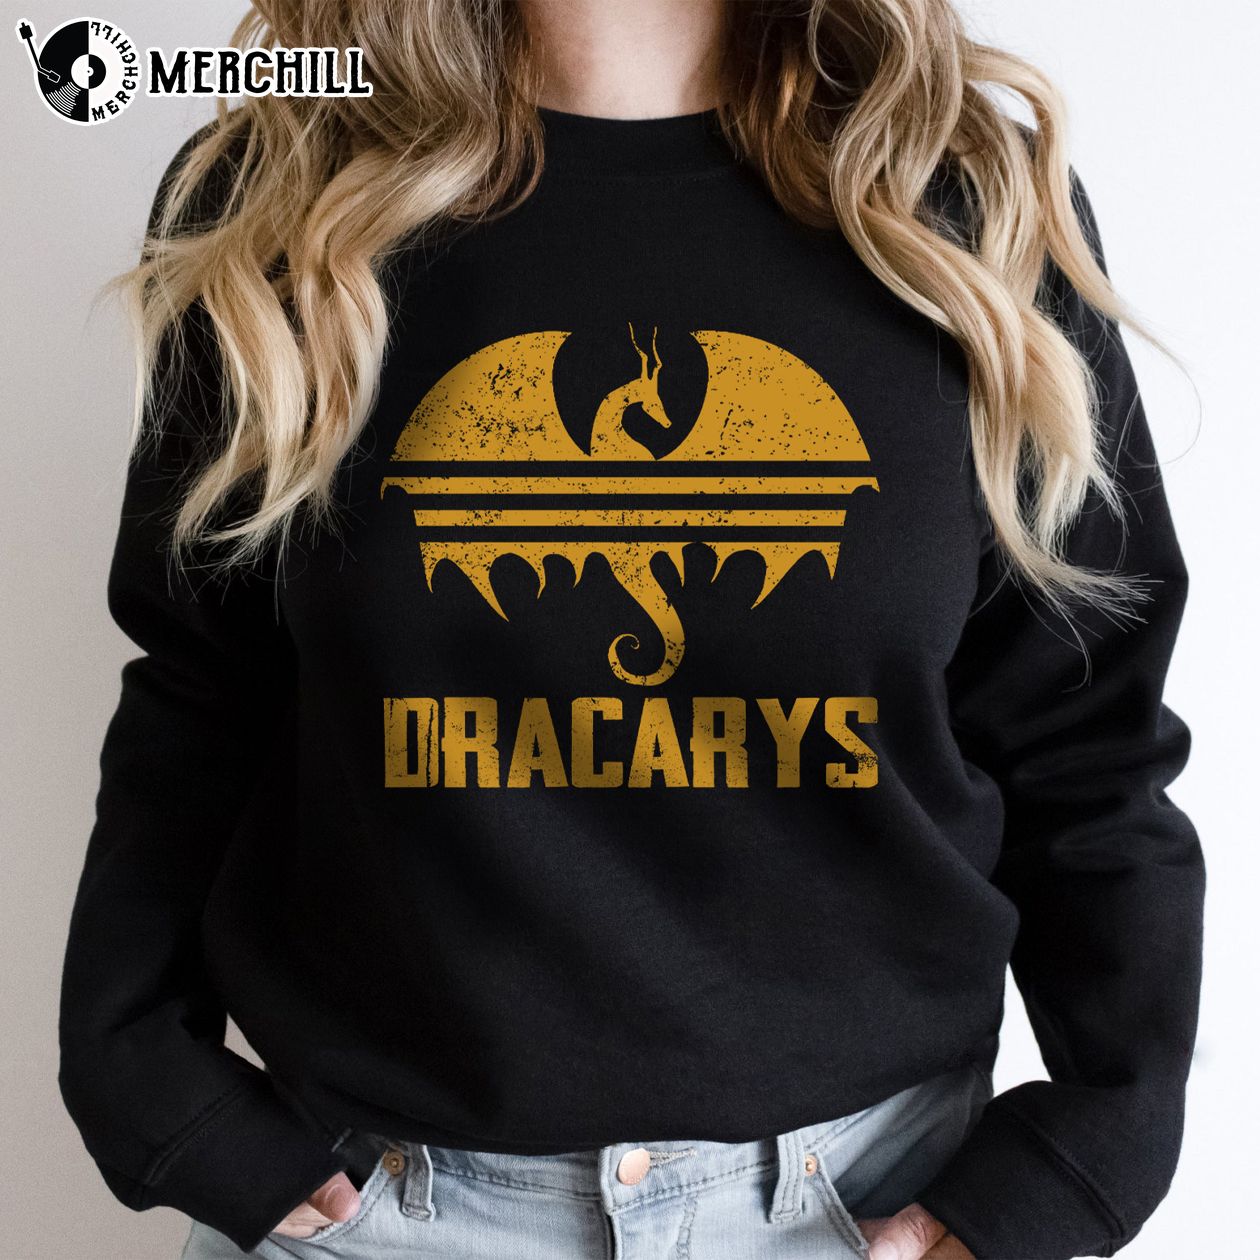 Dracarys Shirt Adidas, of Thrones T Shirt, Dracarys - for Music Lovers